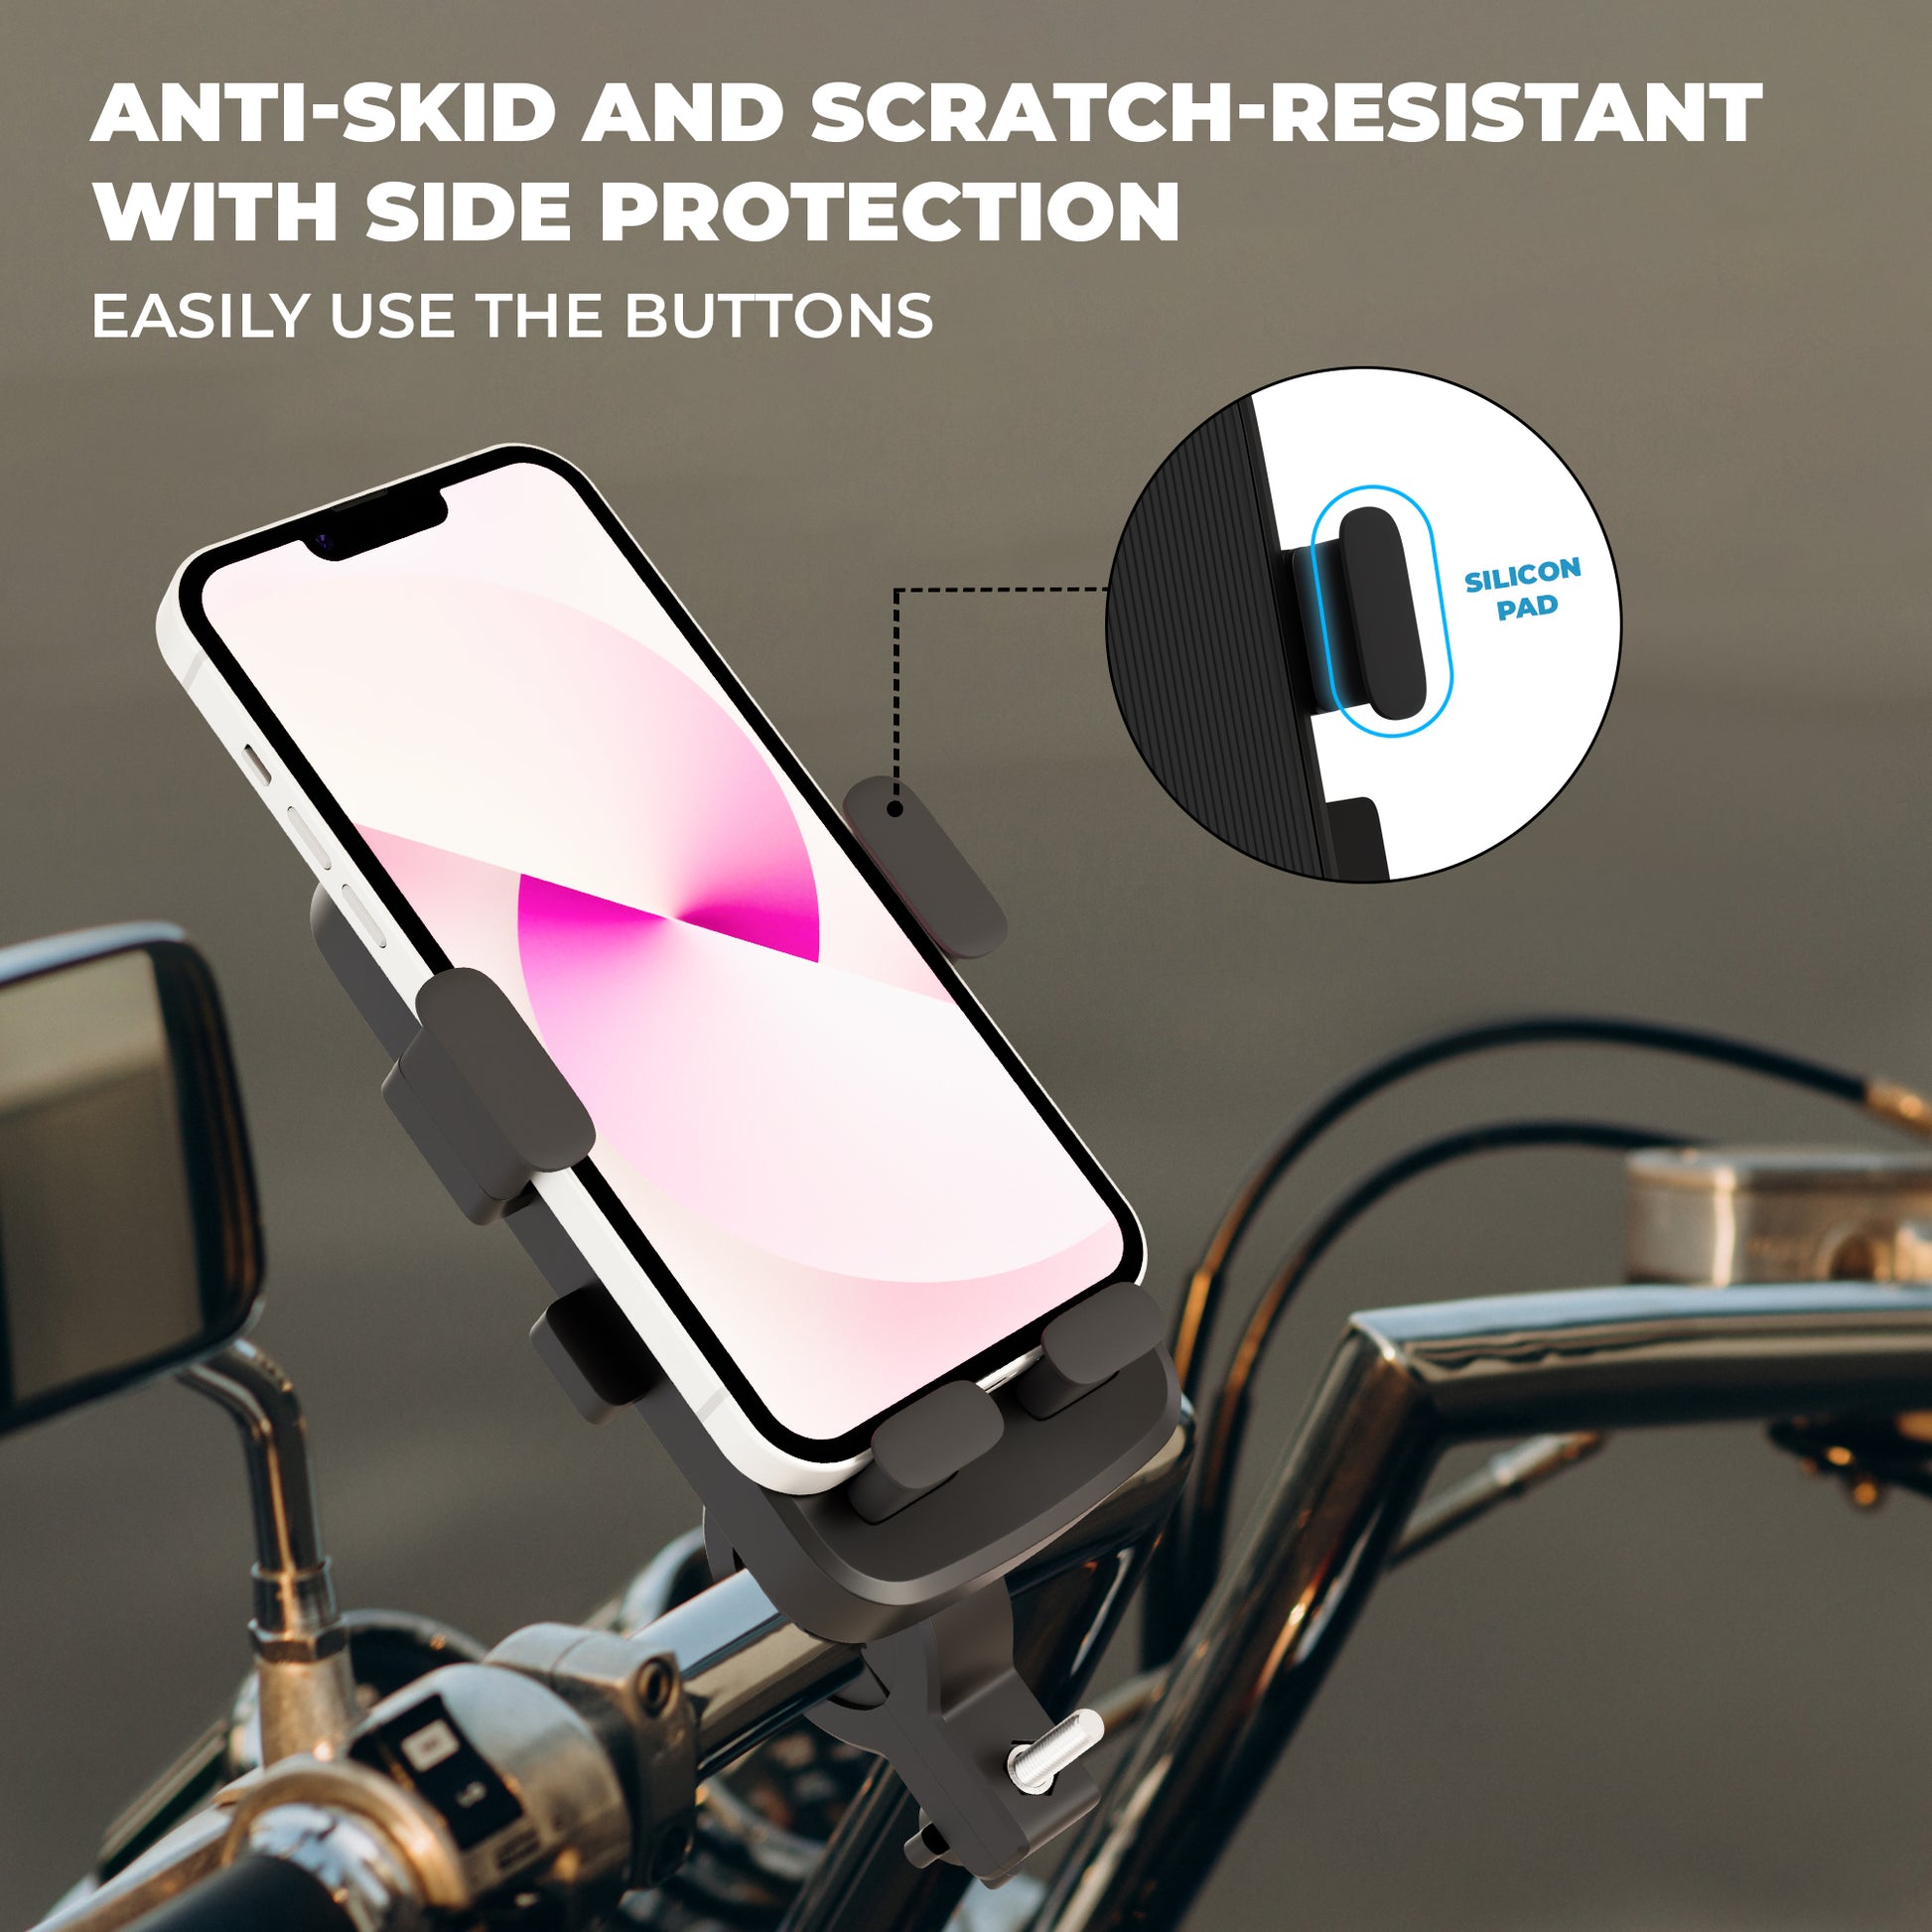 JCBL ACCESSORIES M1 Bike Mobile Holder, High Stablized Design, Shock-Absorbing Silicone Pads, Strong Grip, Metallic Frame for 4.7 to 6.7 inch Mobiles(Black) | ANTI-SKID AND SCRATCH-RESISTANT WITH SIDE PROTECTION EASILY USE THE BUTTONS